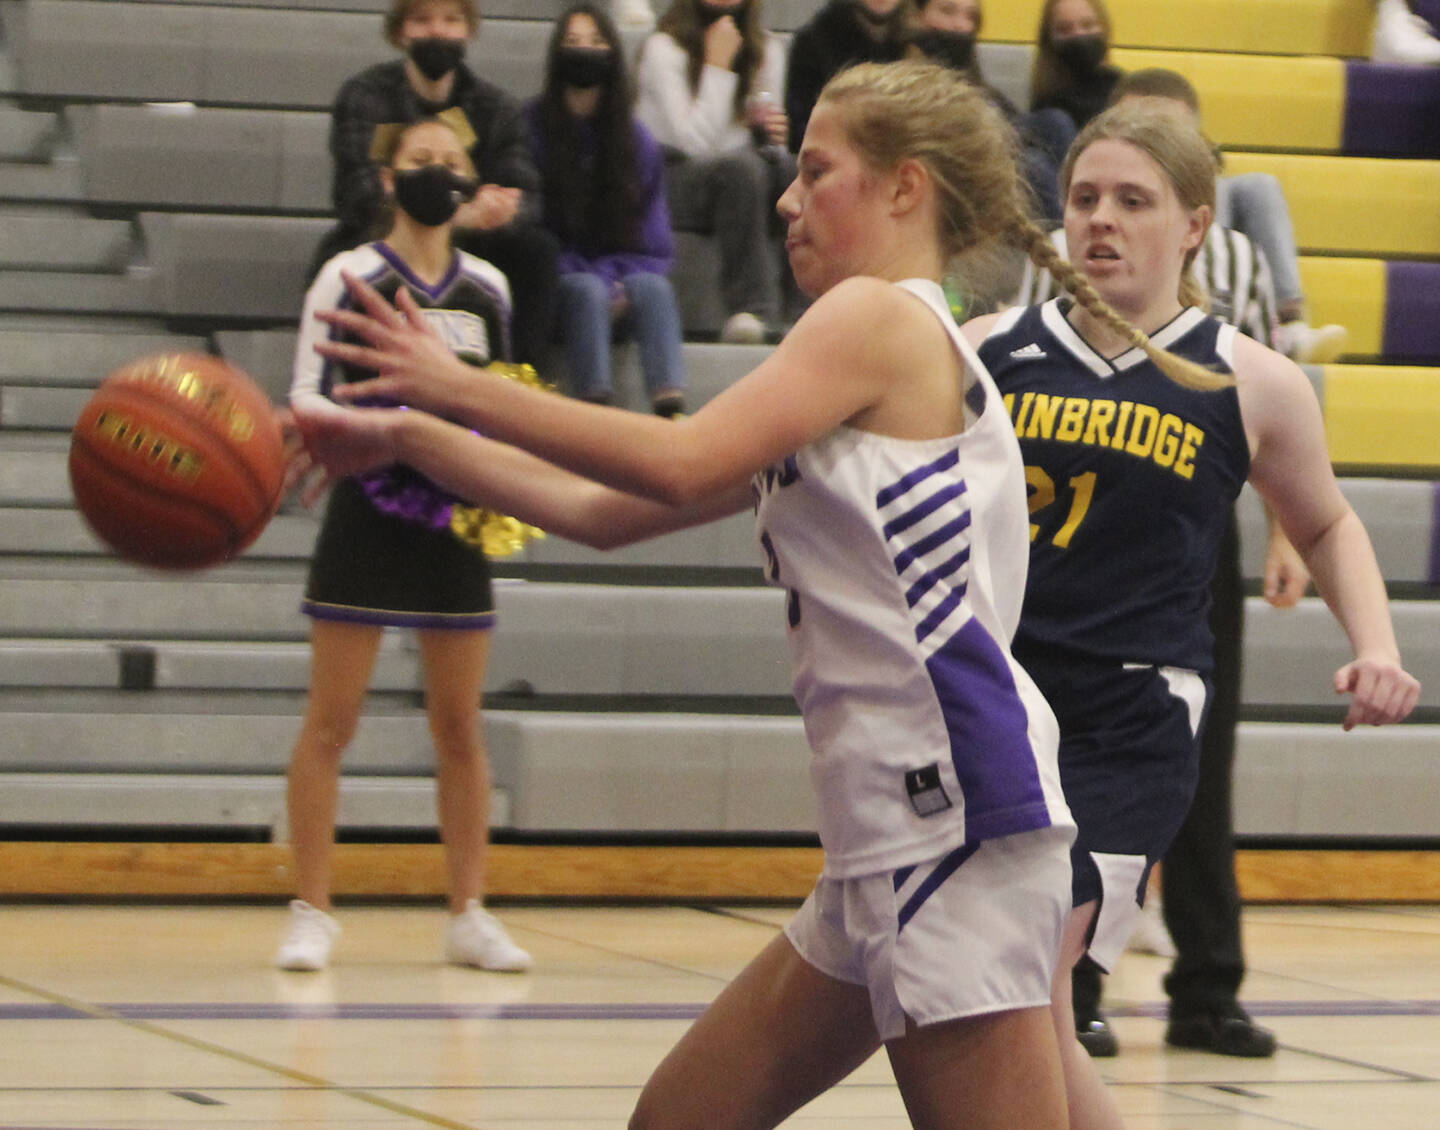 Sophomore standout Evelyn Beers was held to six points. Steve Powell/File Photos